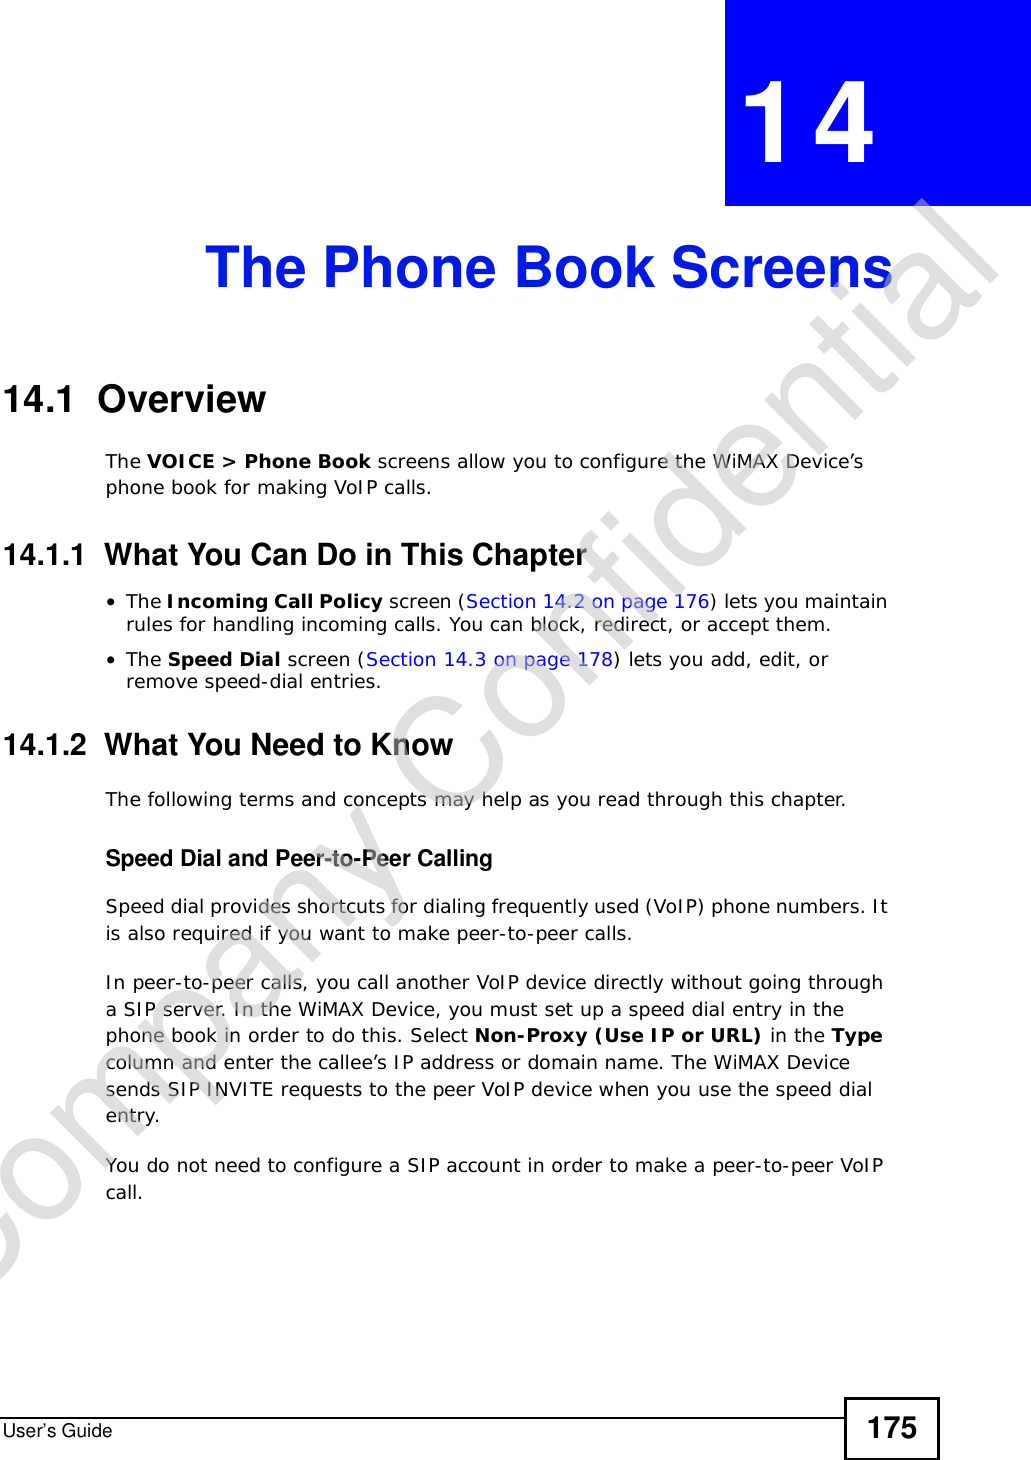 User’s Guide 175CHAPTER 14The Phone Book Screens14.1  OverviewThe VOICE &gt; Phone Book screens allow you to configure the WiMAX Device’s phone book for making VoIP calls.14.1.1  What You Can Do in This Chapter•The Incoming Call Policy screen (Section 14.2 on page 176) lets you maintain rules for handling incoming calls. You can block, redirect, or accept them.•The Speed Dial screen (Section 14.3 on page 178) lets you add, edit, or remove speed-dial entries.14.1.2  What You Need to KnowThe following terms and concepts may help as you read through this chapter.Speed Dial and Peer-to-Peer CallingSpeed dial provides shortcuts for dialing frequently used (VoIP) phone numbers. It is also required if you want to make peer-to-peer calls. In peer-to-peer calls, you call another VoIP device directly without going through a SIP server. In the WiMAX Device, you must set up a speed dial entry in the phone book in order to do this. Select Non-Proxy (Use IP or URL) in the Typecolumn and enter the callee’s IP address or domain name. The WiMAX Device sends SIP INVITE requests to the peer VoIP device when you use the speed dial entry.You do not need to configure a SIP account in order to make a peer-to-peer VoIP call.Company Confidential